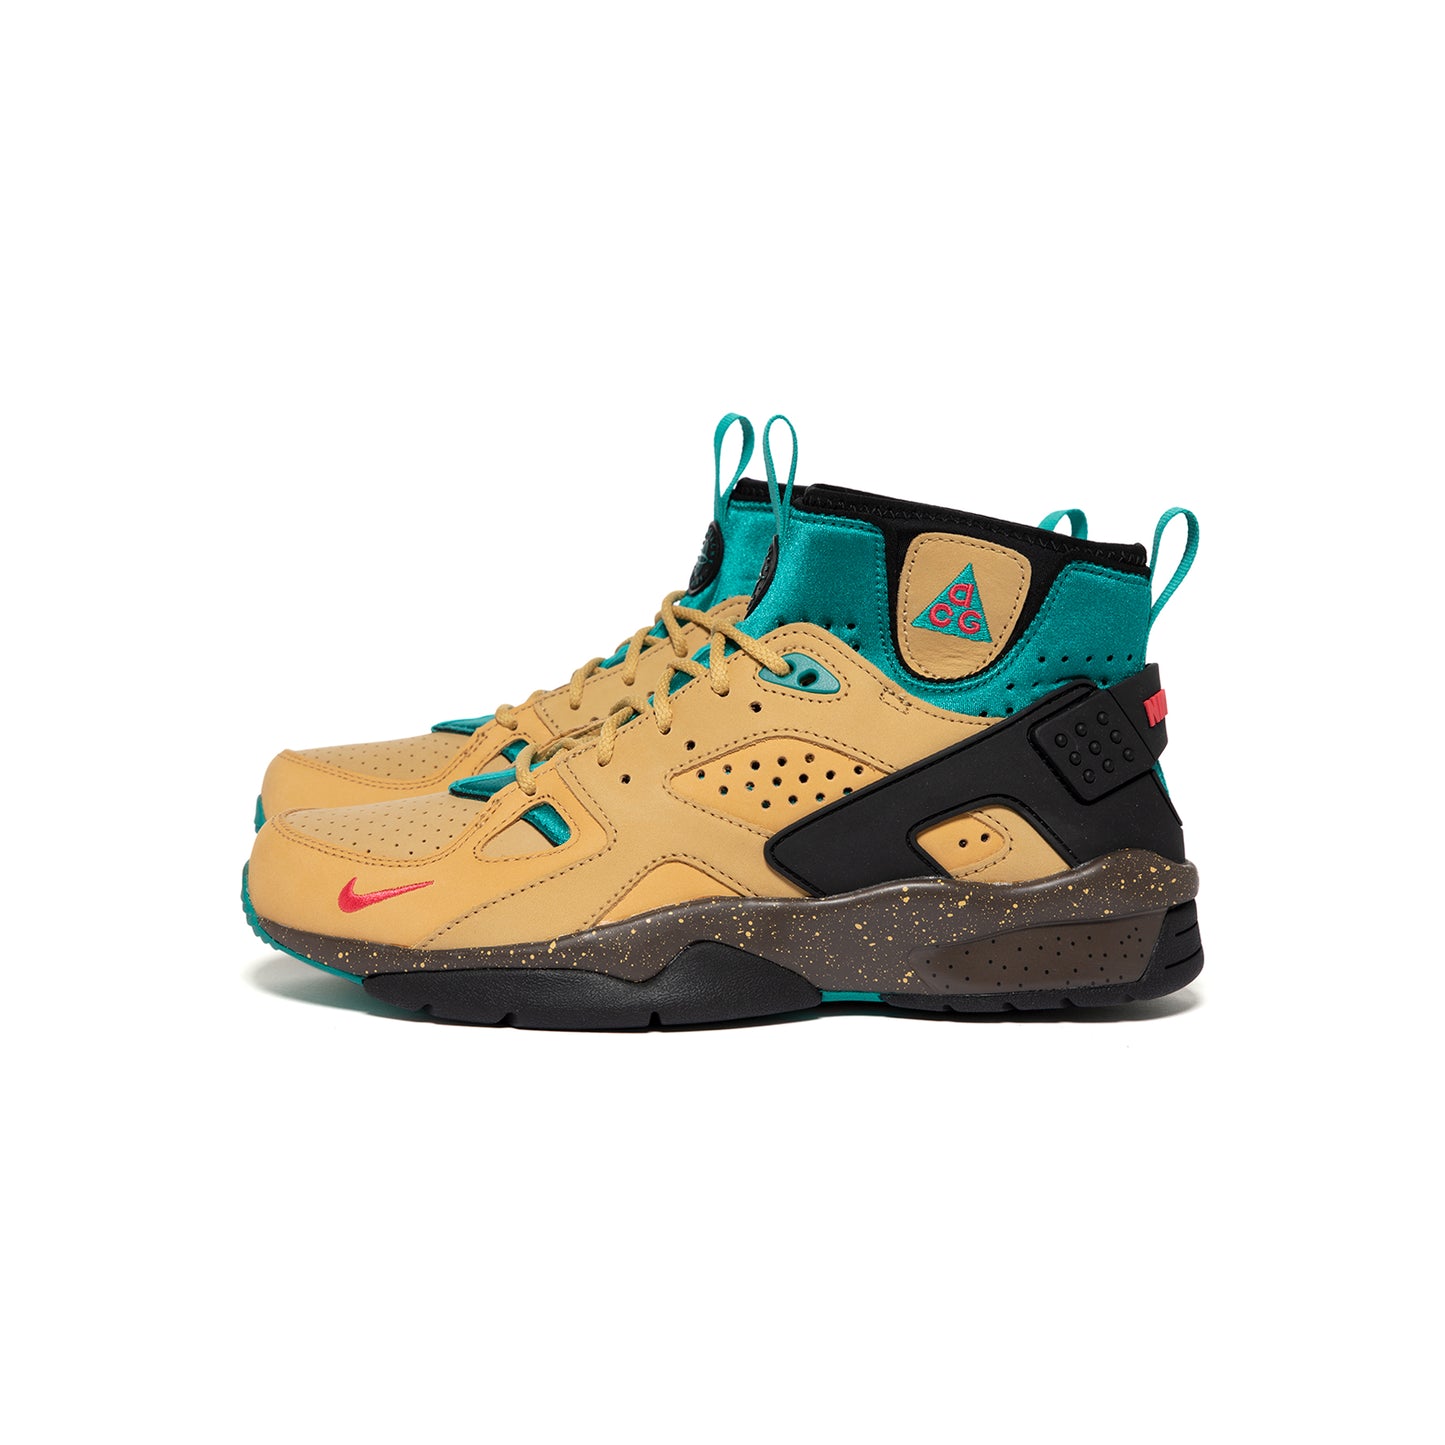 Nike ACG Air Mowabb (Twine/Fusion Red/Club Gold/Teal Charge)